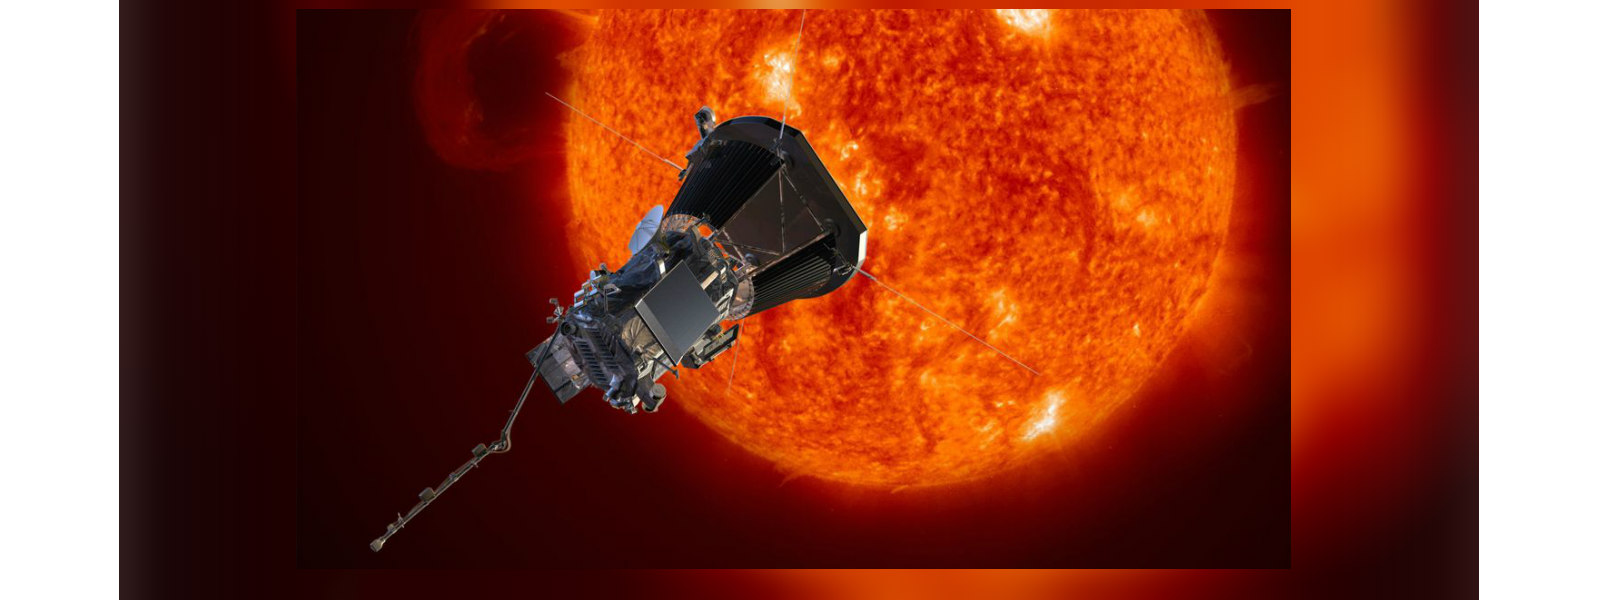 NASA launches probe to reach the closest to sun